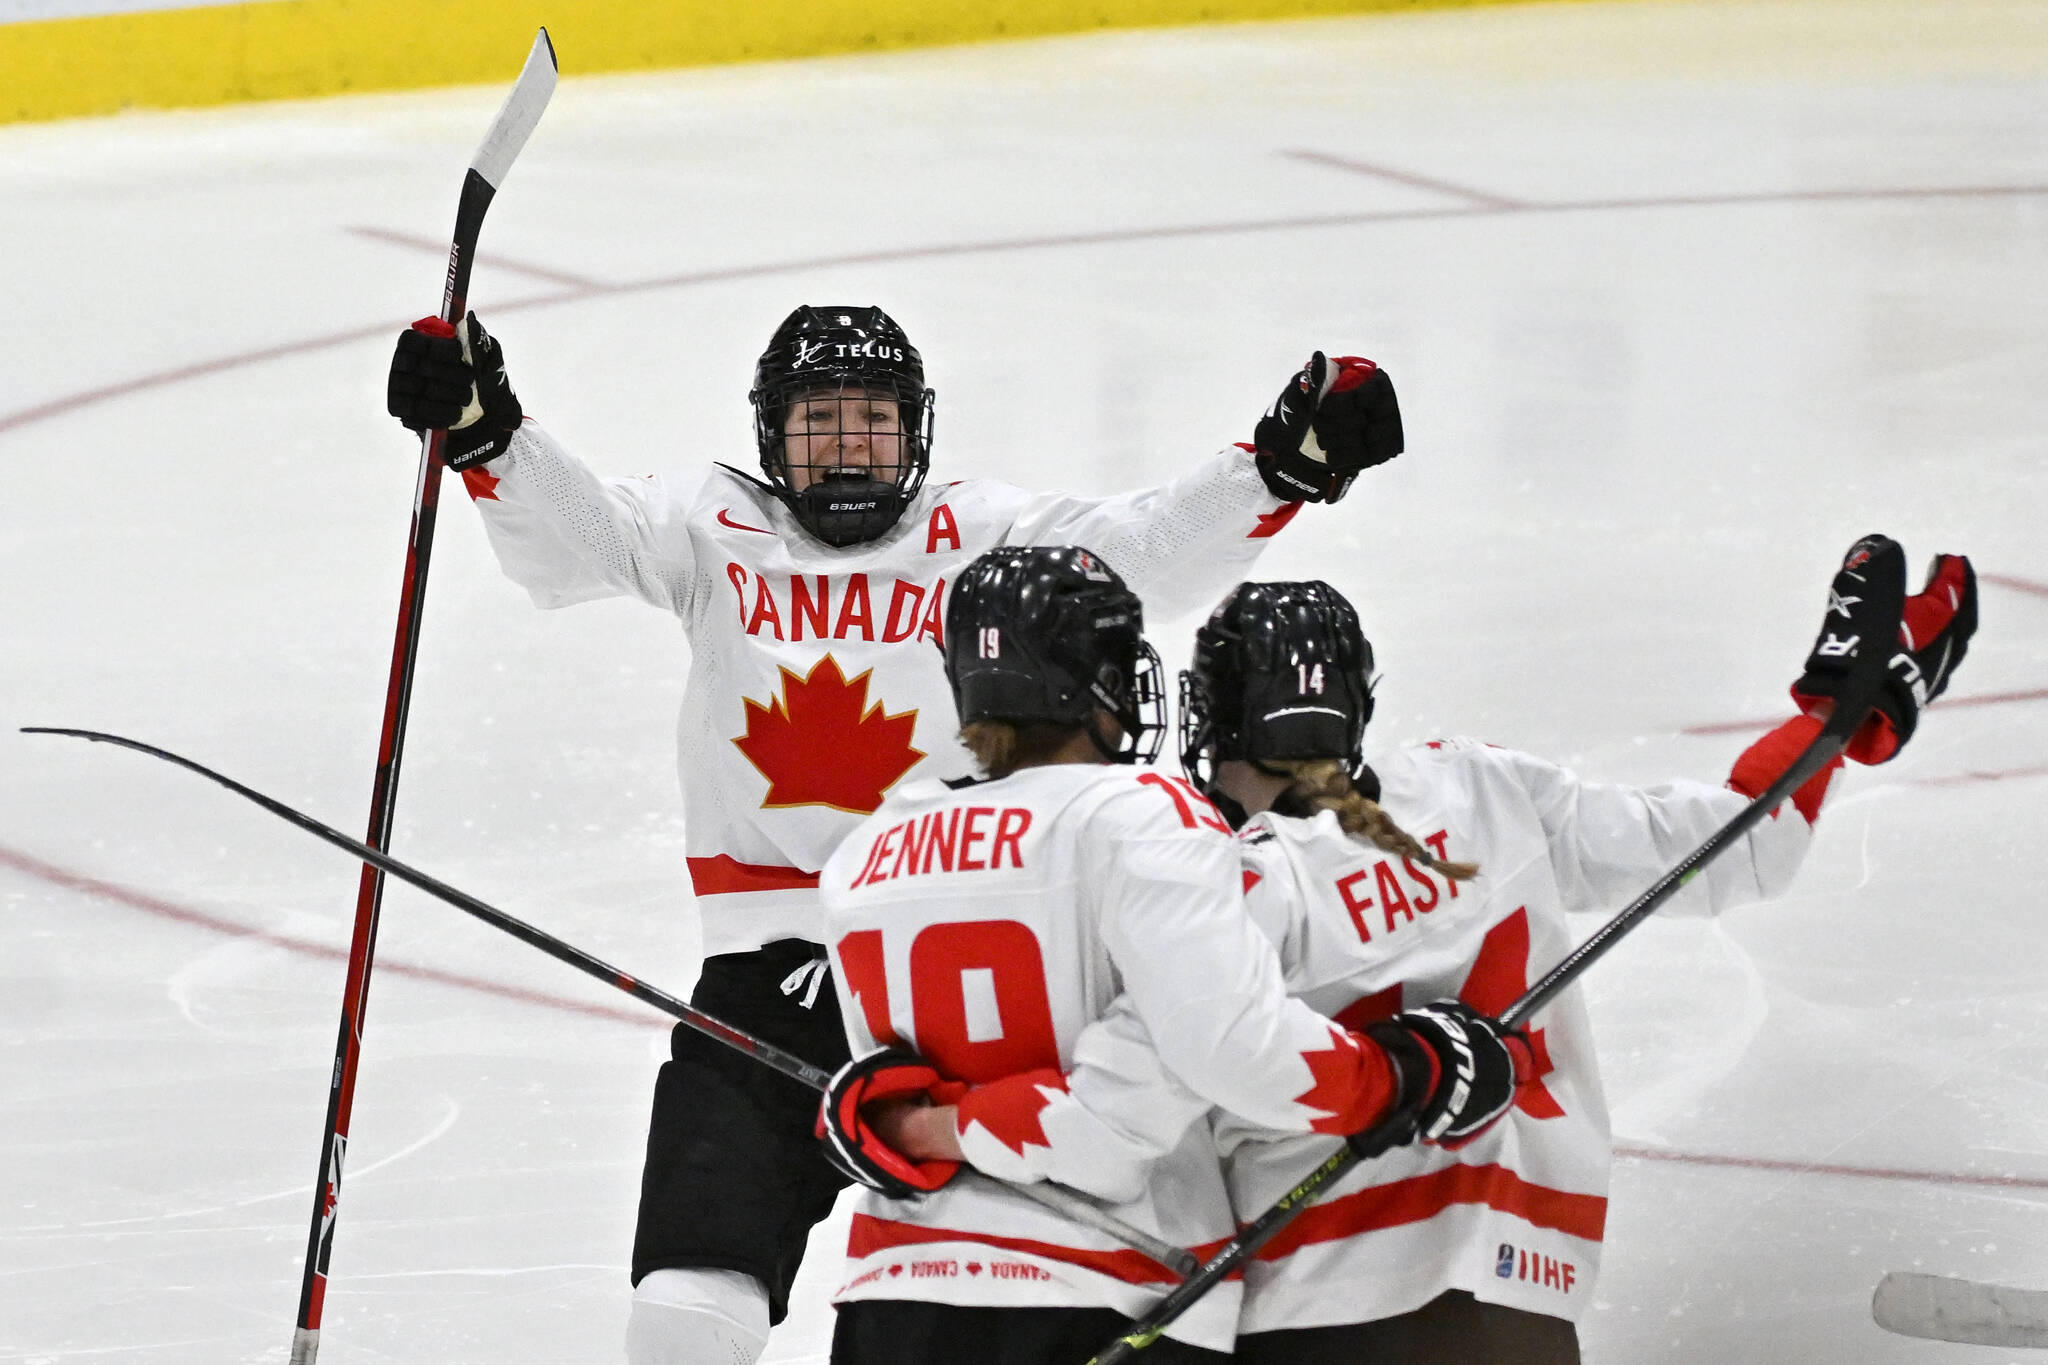 New women's hockey league projected to launch in January after PHF  purchase: reports